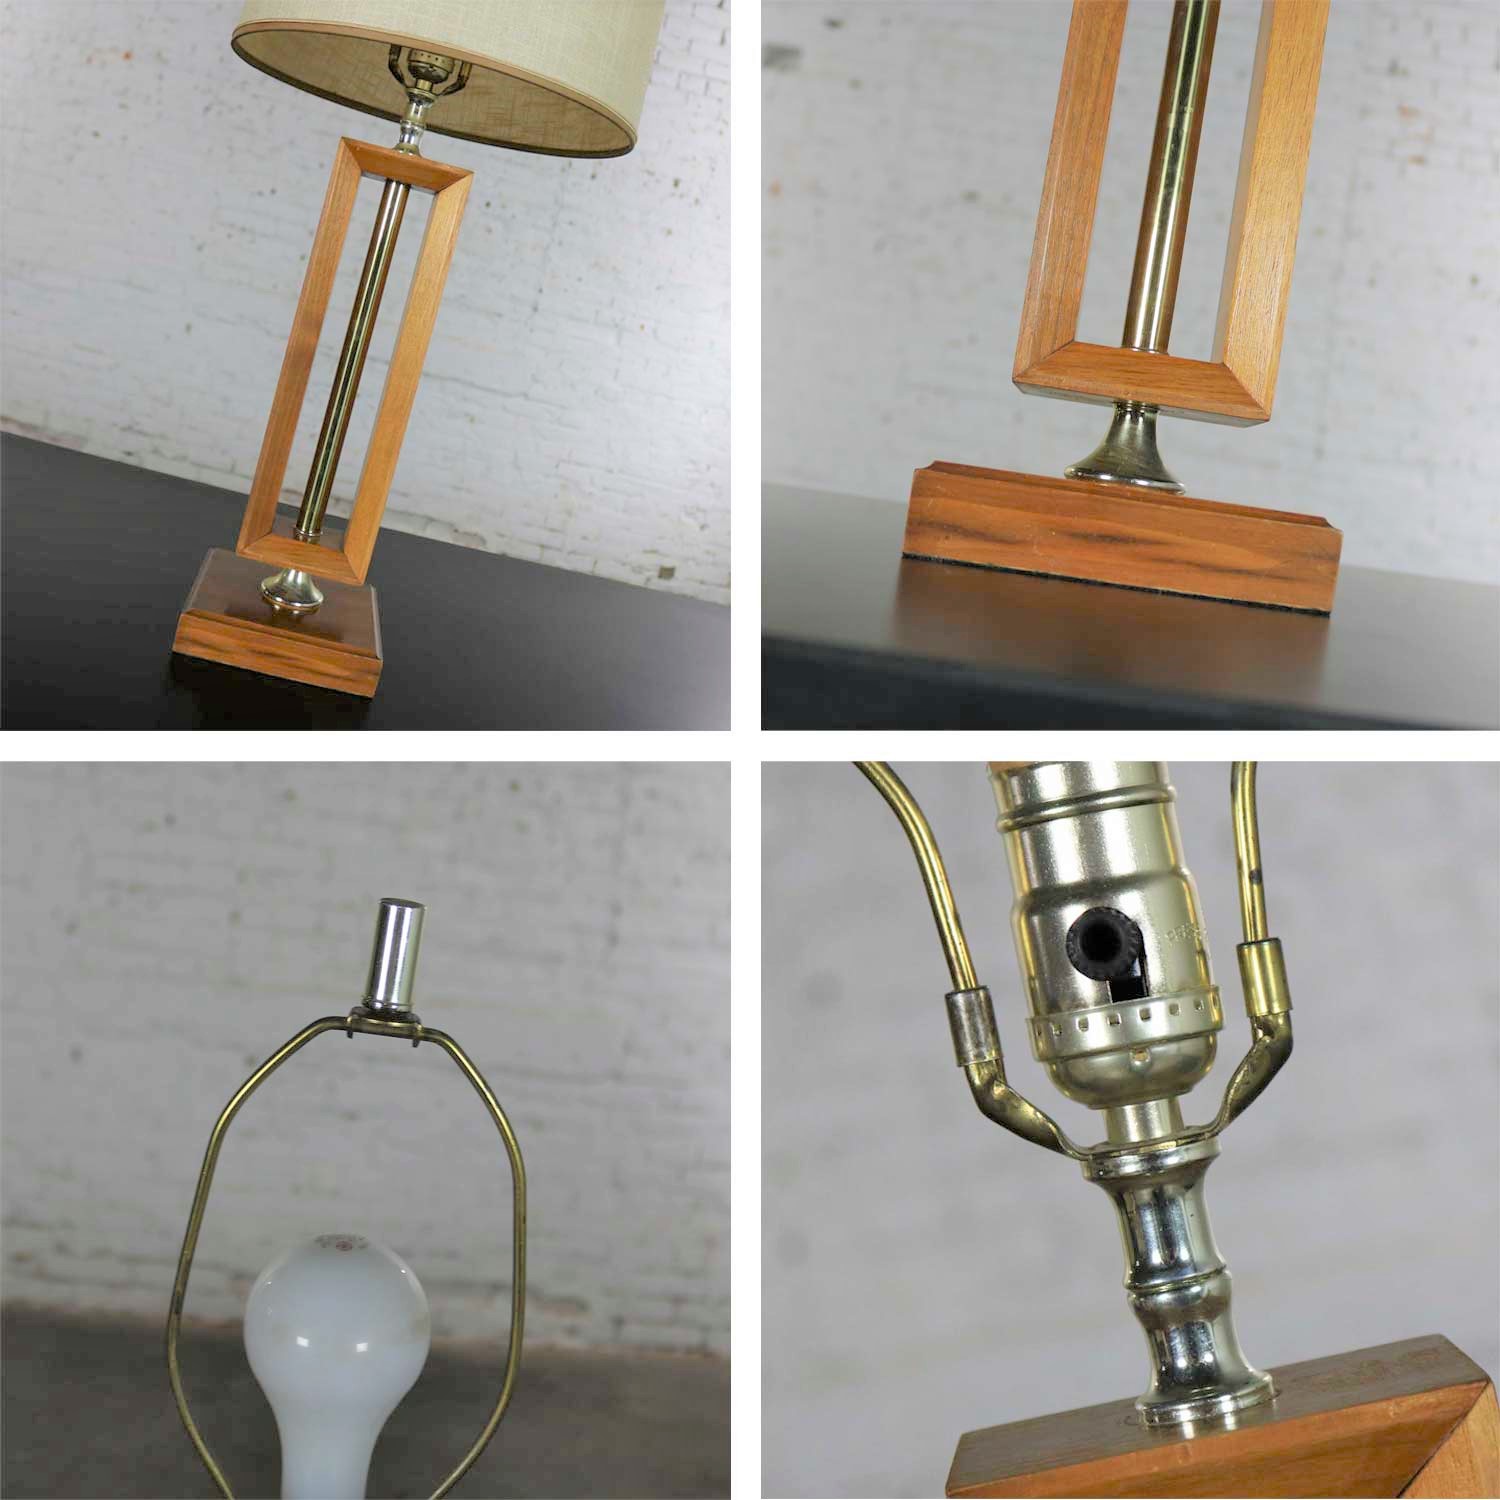 Small Scale Mid Century Modern Walnut and Brass Lamp Style of Laurel Lamp  Mfg. Co.